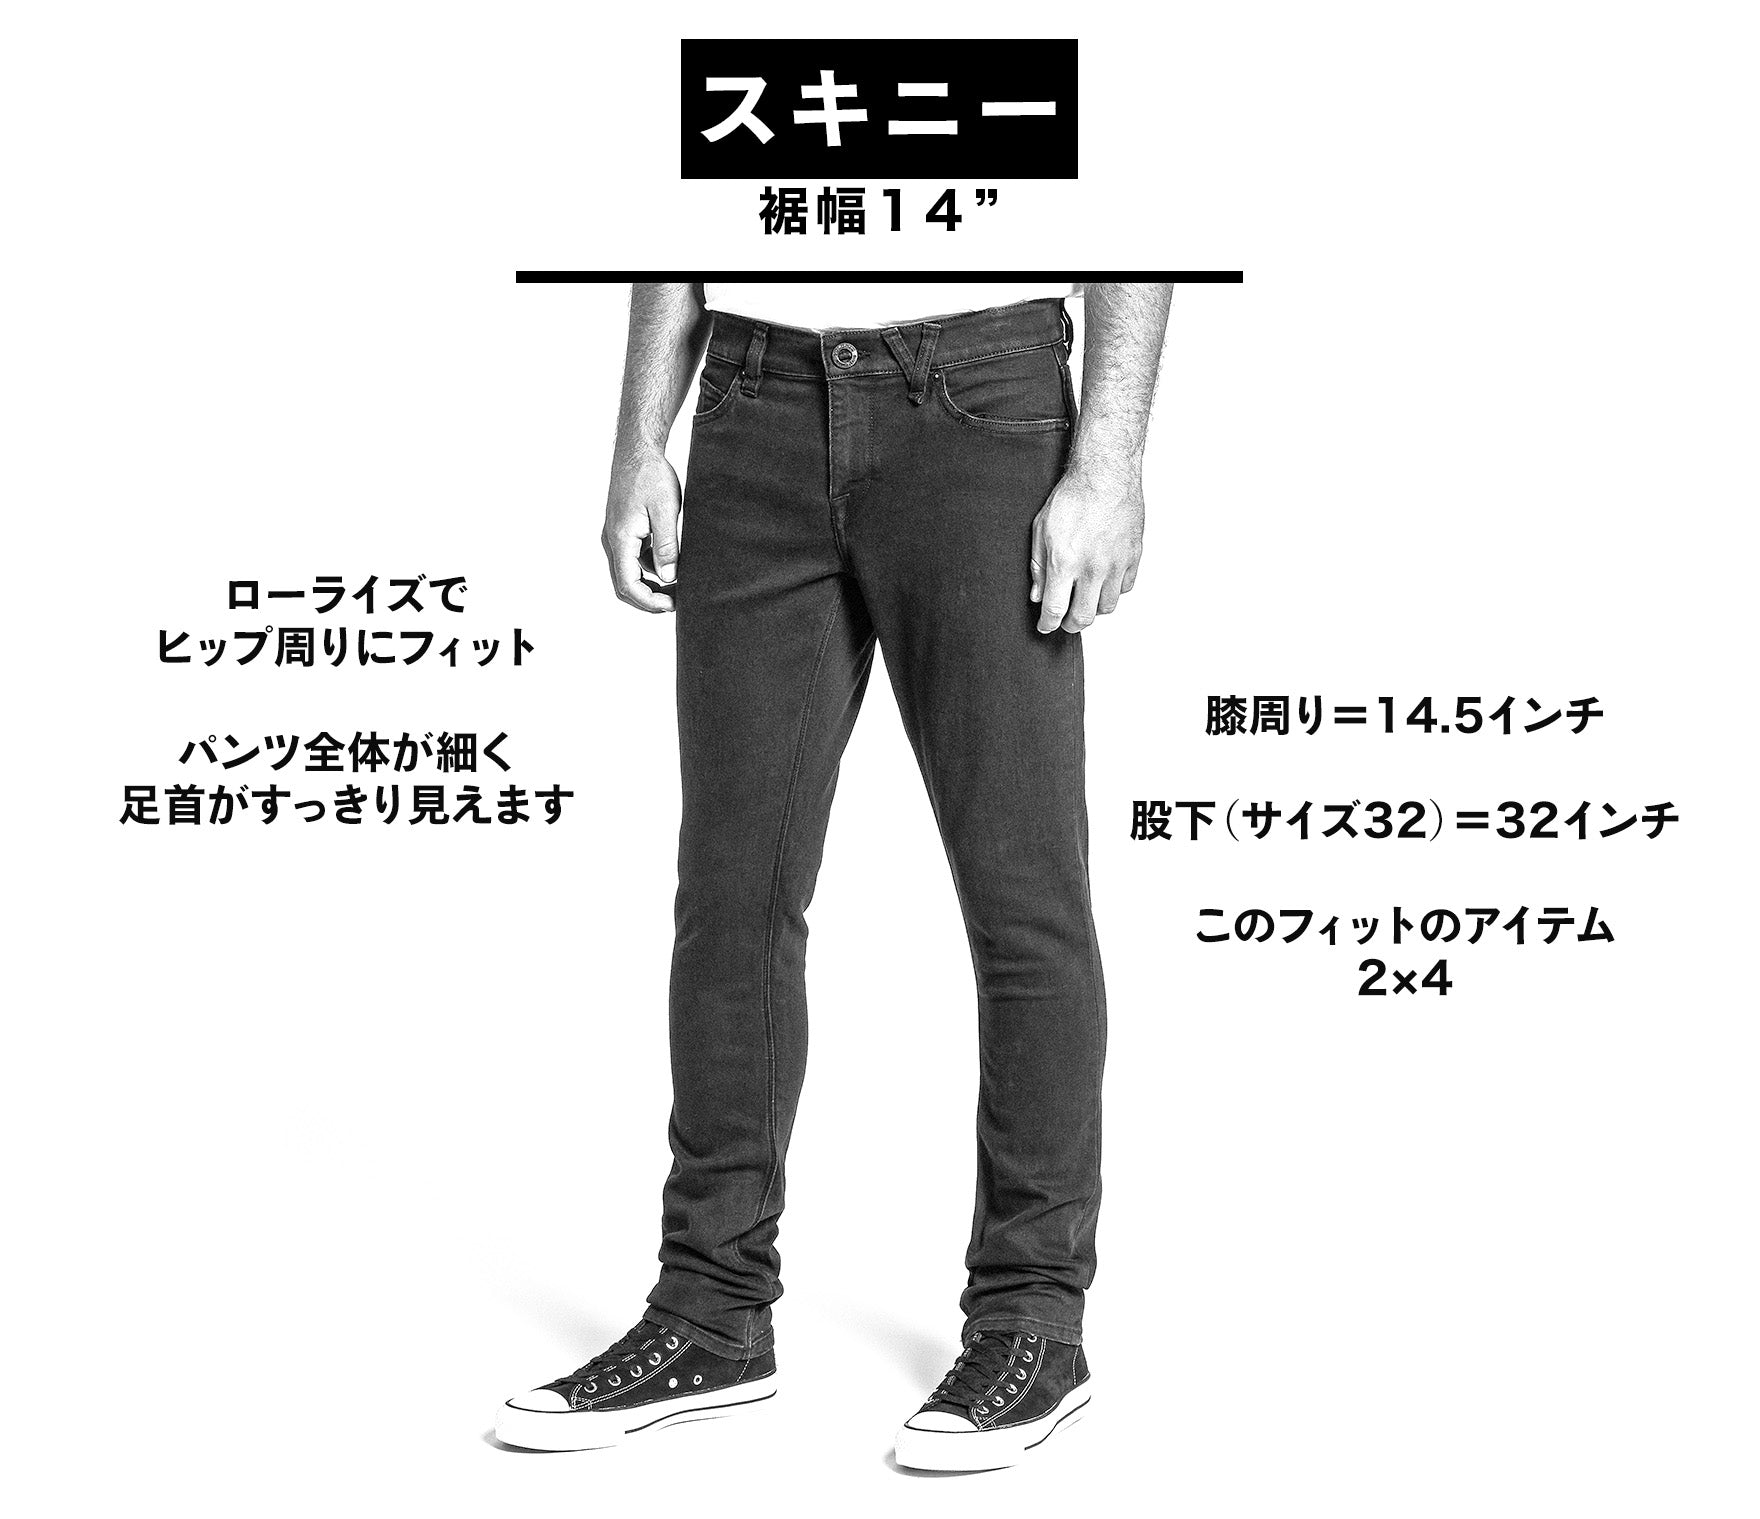 2X4 Skinny Fit Jeans - Black Out – Volcom Japan